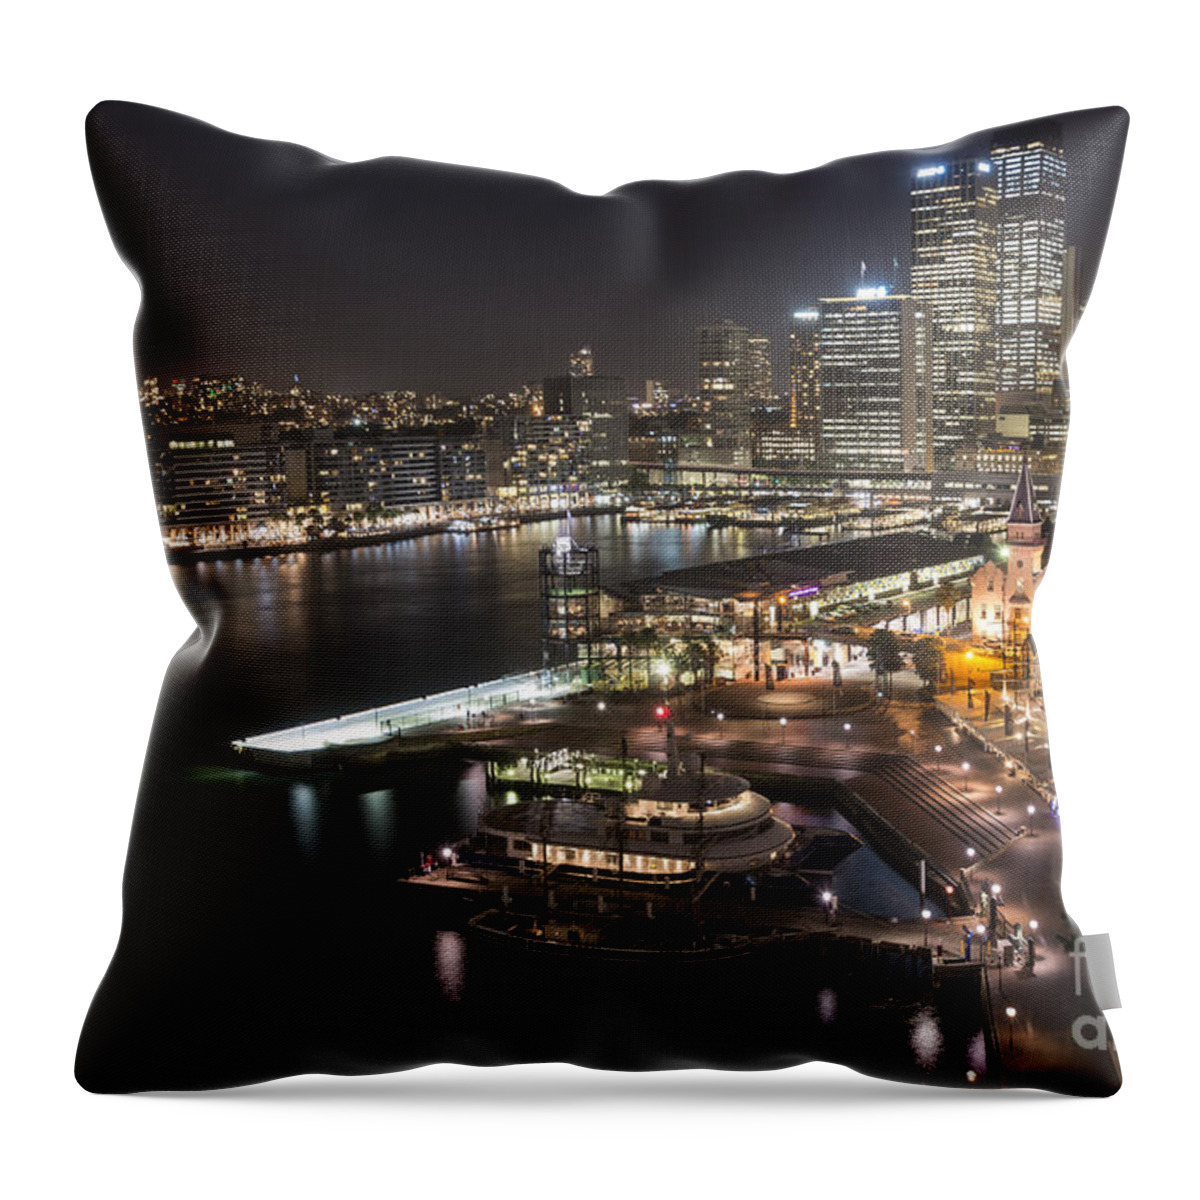 Sydney Throw Pillow featuring the photograph Sydney's Circular Quay by Bob Phillips